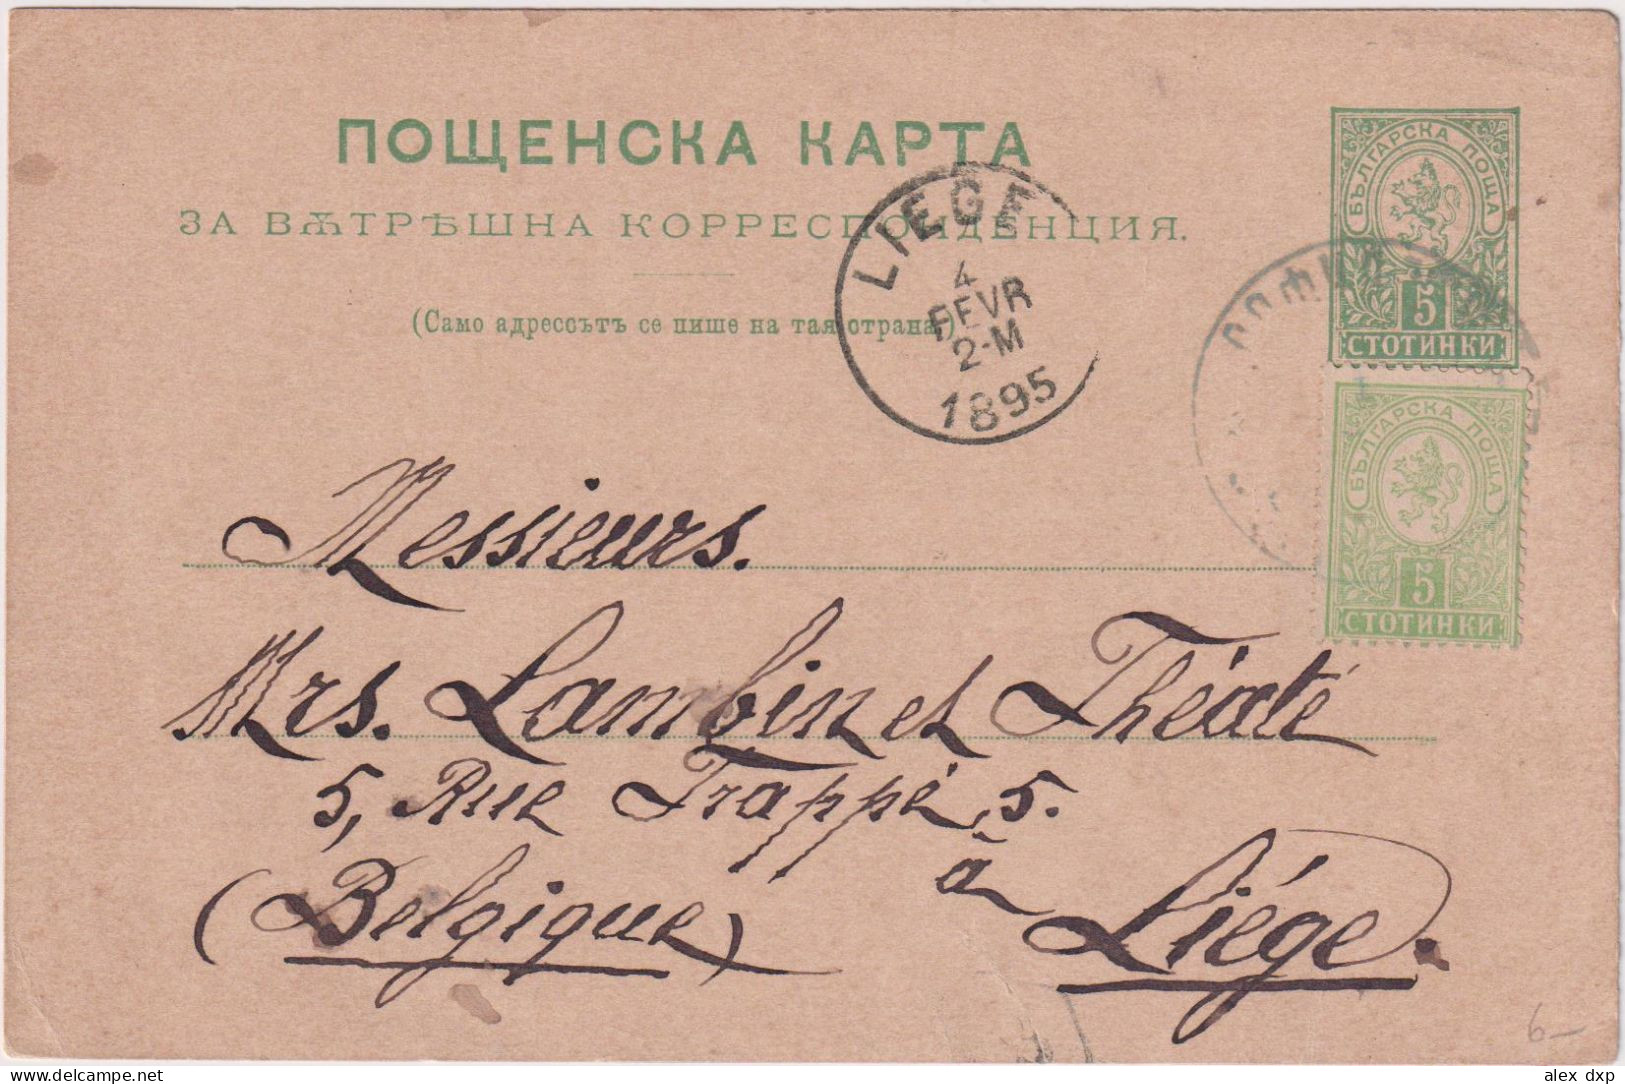 BULGARIA > 1895 POSTAL HISTORY > Stationary Card From Sofia To Liege, Belgium - Covers & Documents